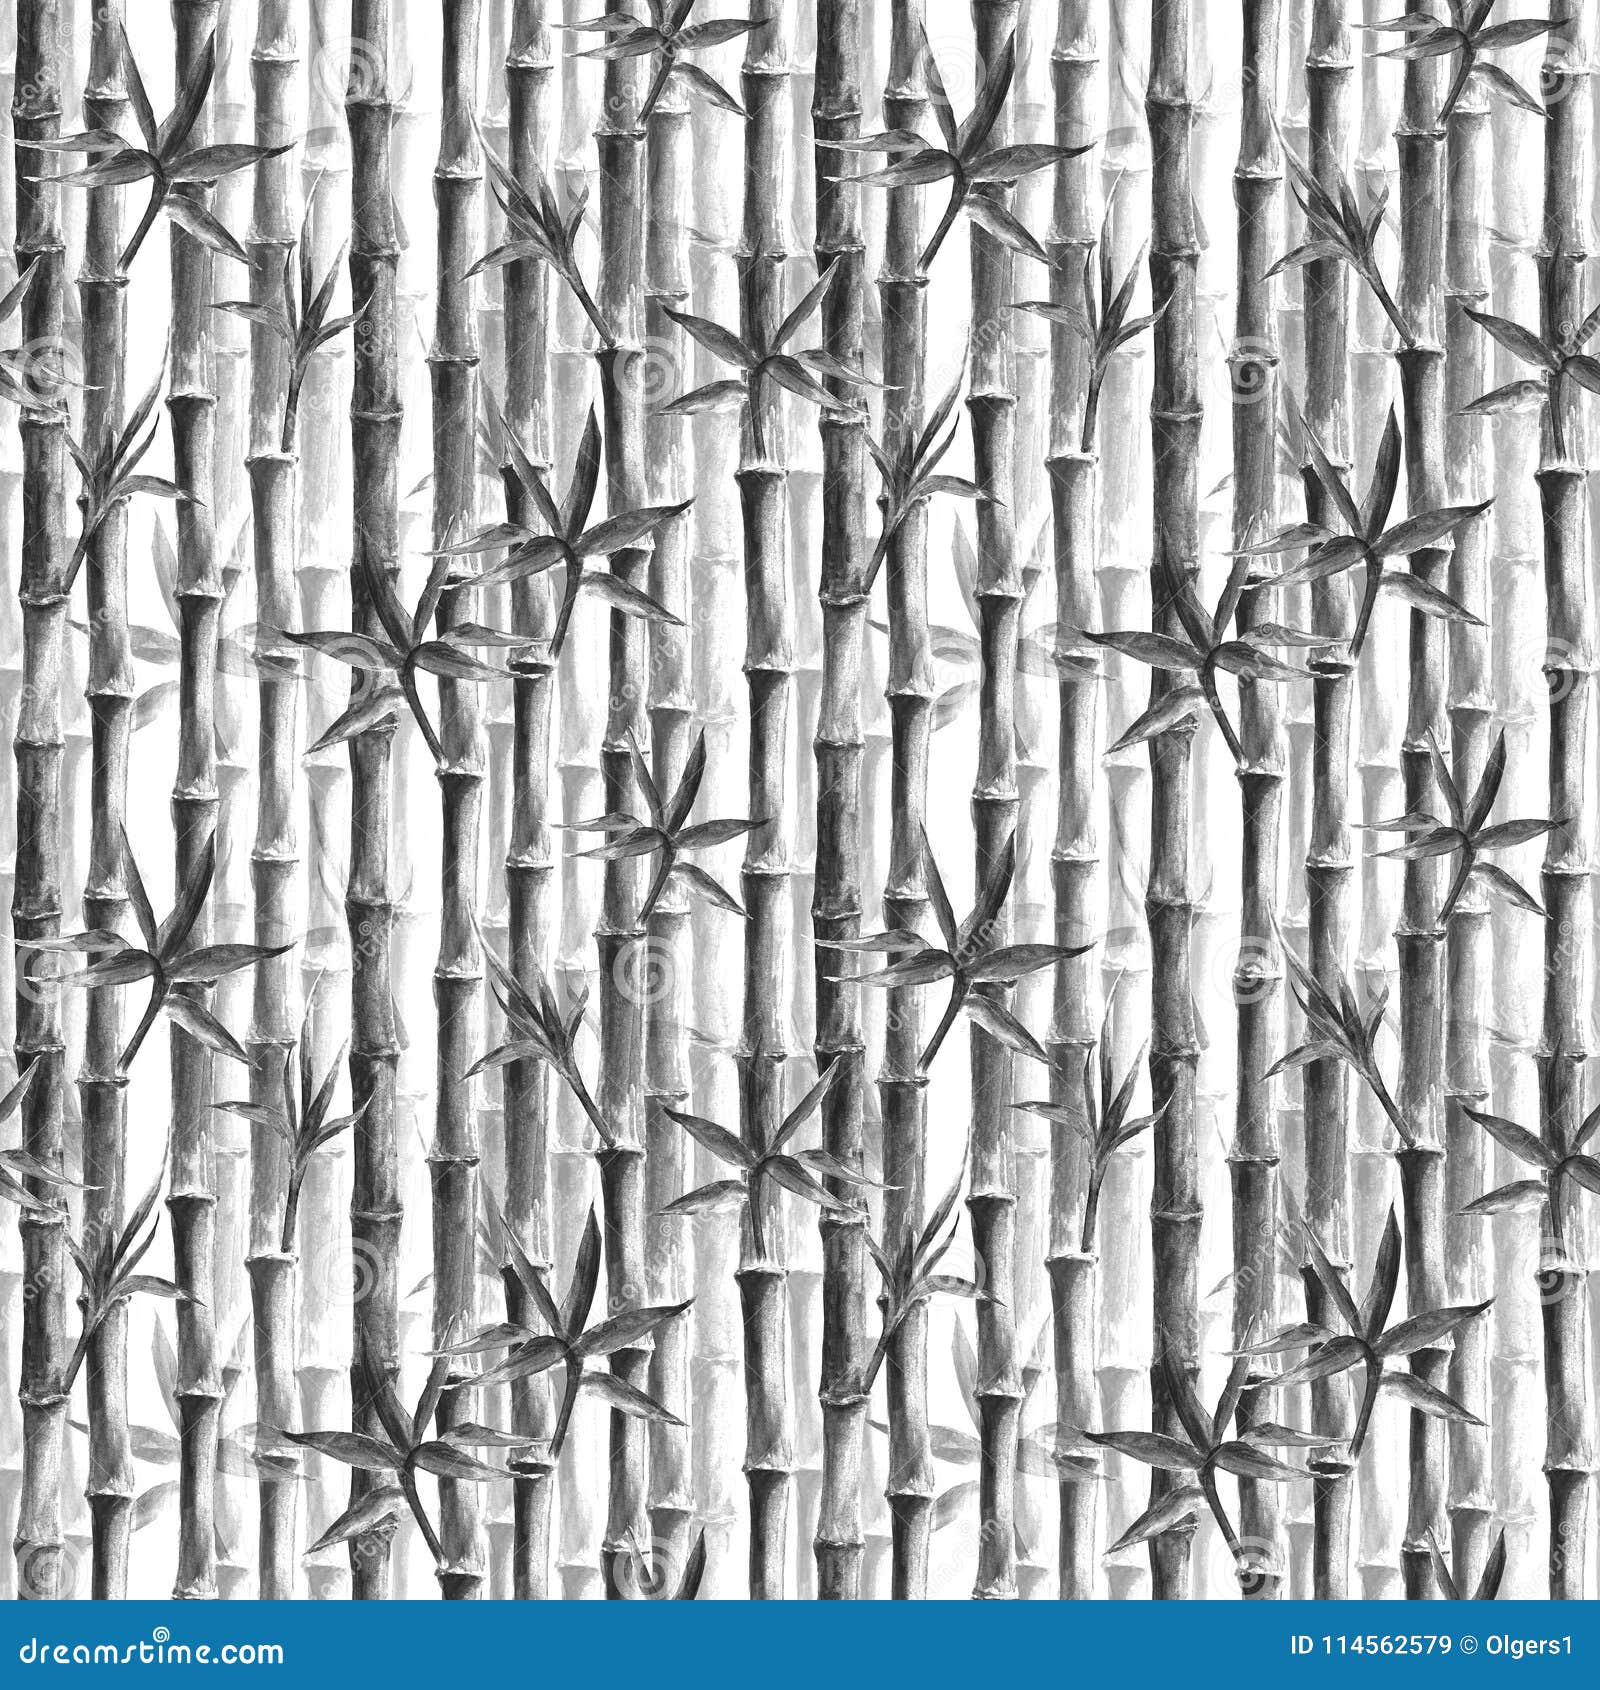 Black and White Bamboo Forest Seamless Pattern Stock Illustration -  Illustration of background, decorative: 114562579